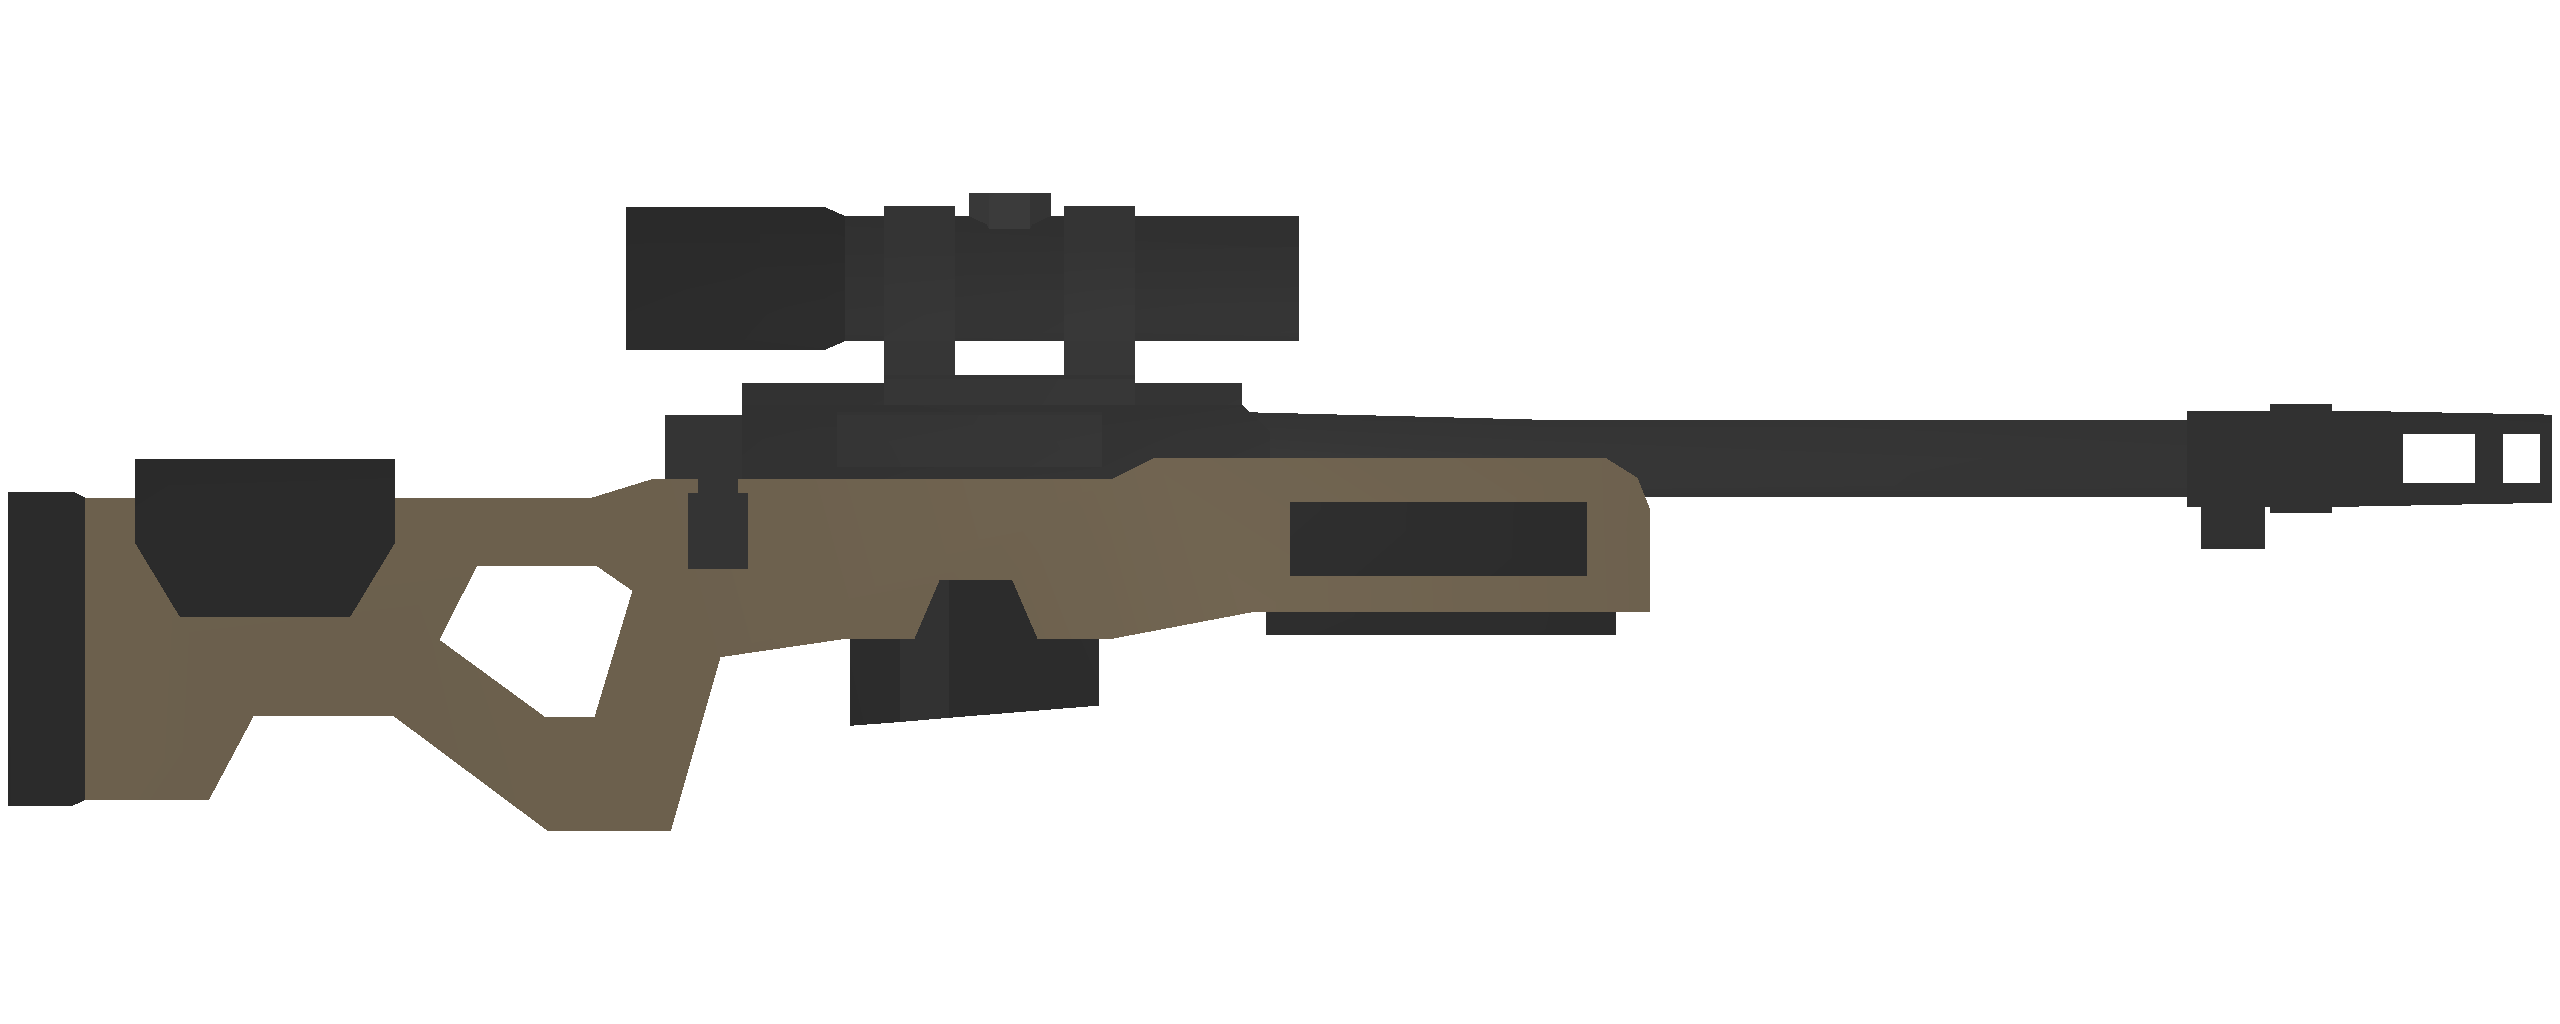 Unturned All ID lists for Magazines and Attachments - Kuwait Items Redux - Sniper Rifles - 682CEEA